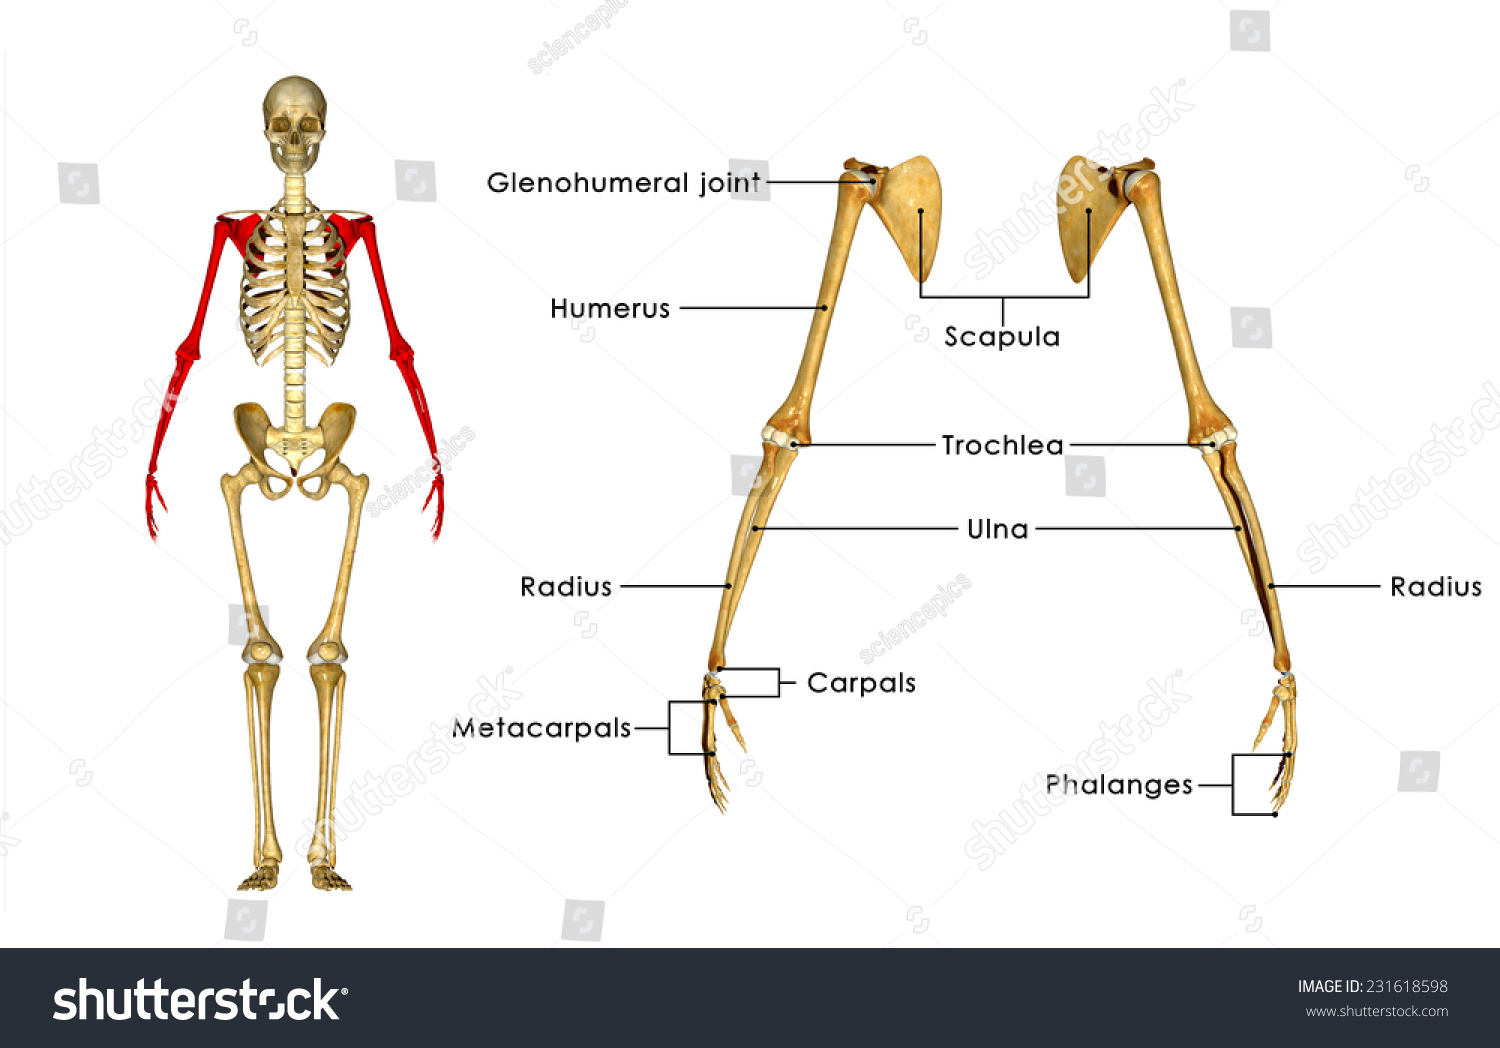 Bones Of The Arm And Hand Stock Photo 231618598 : Shutterstock